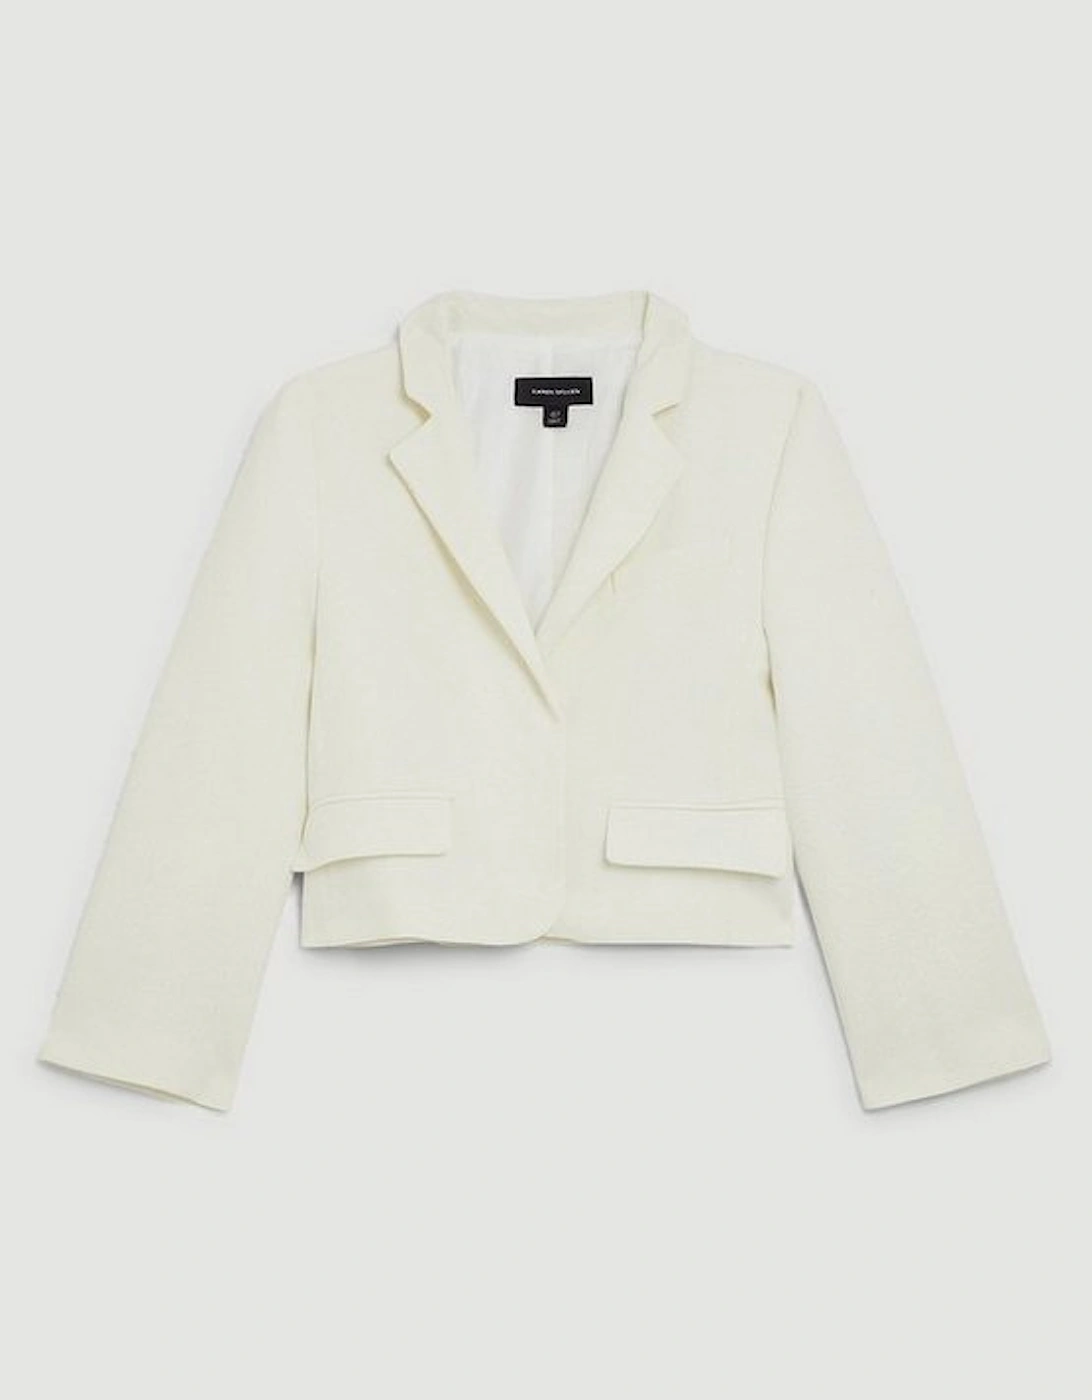 Textured Crepe Notch Neck Tailored Jacket